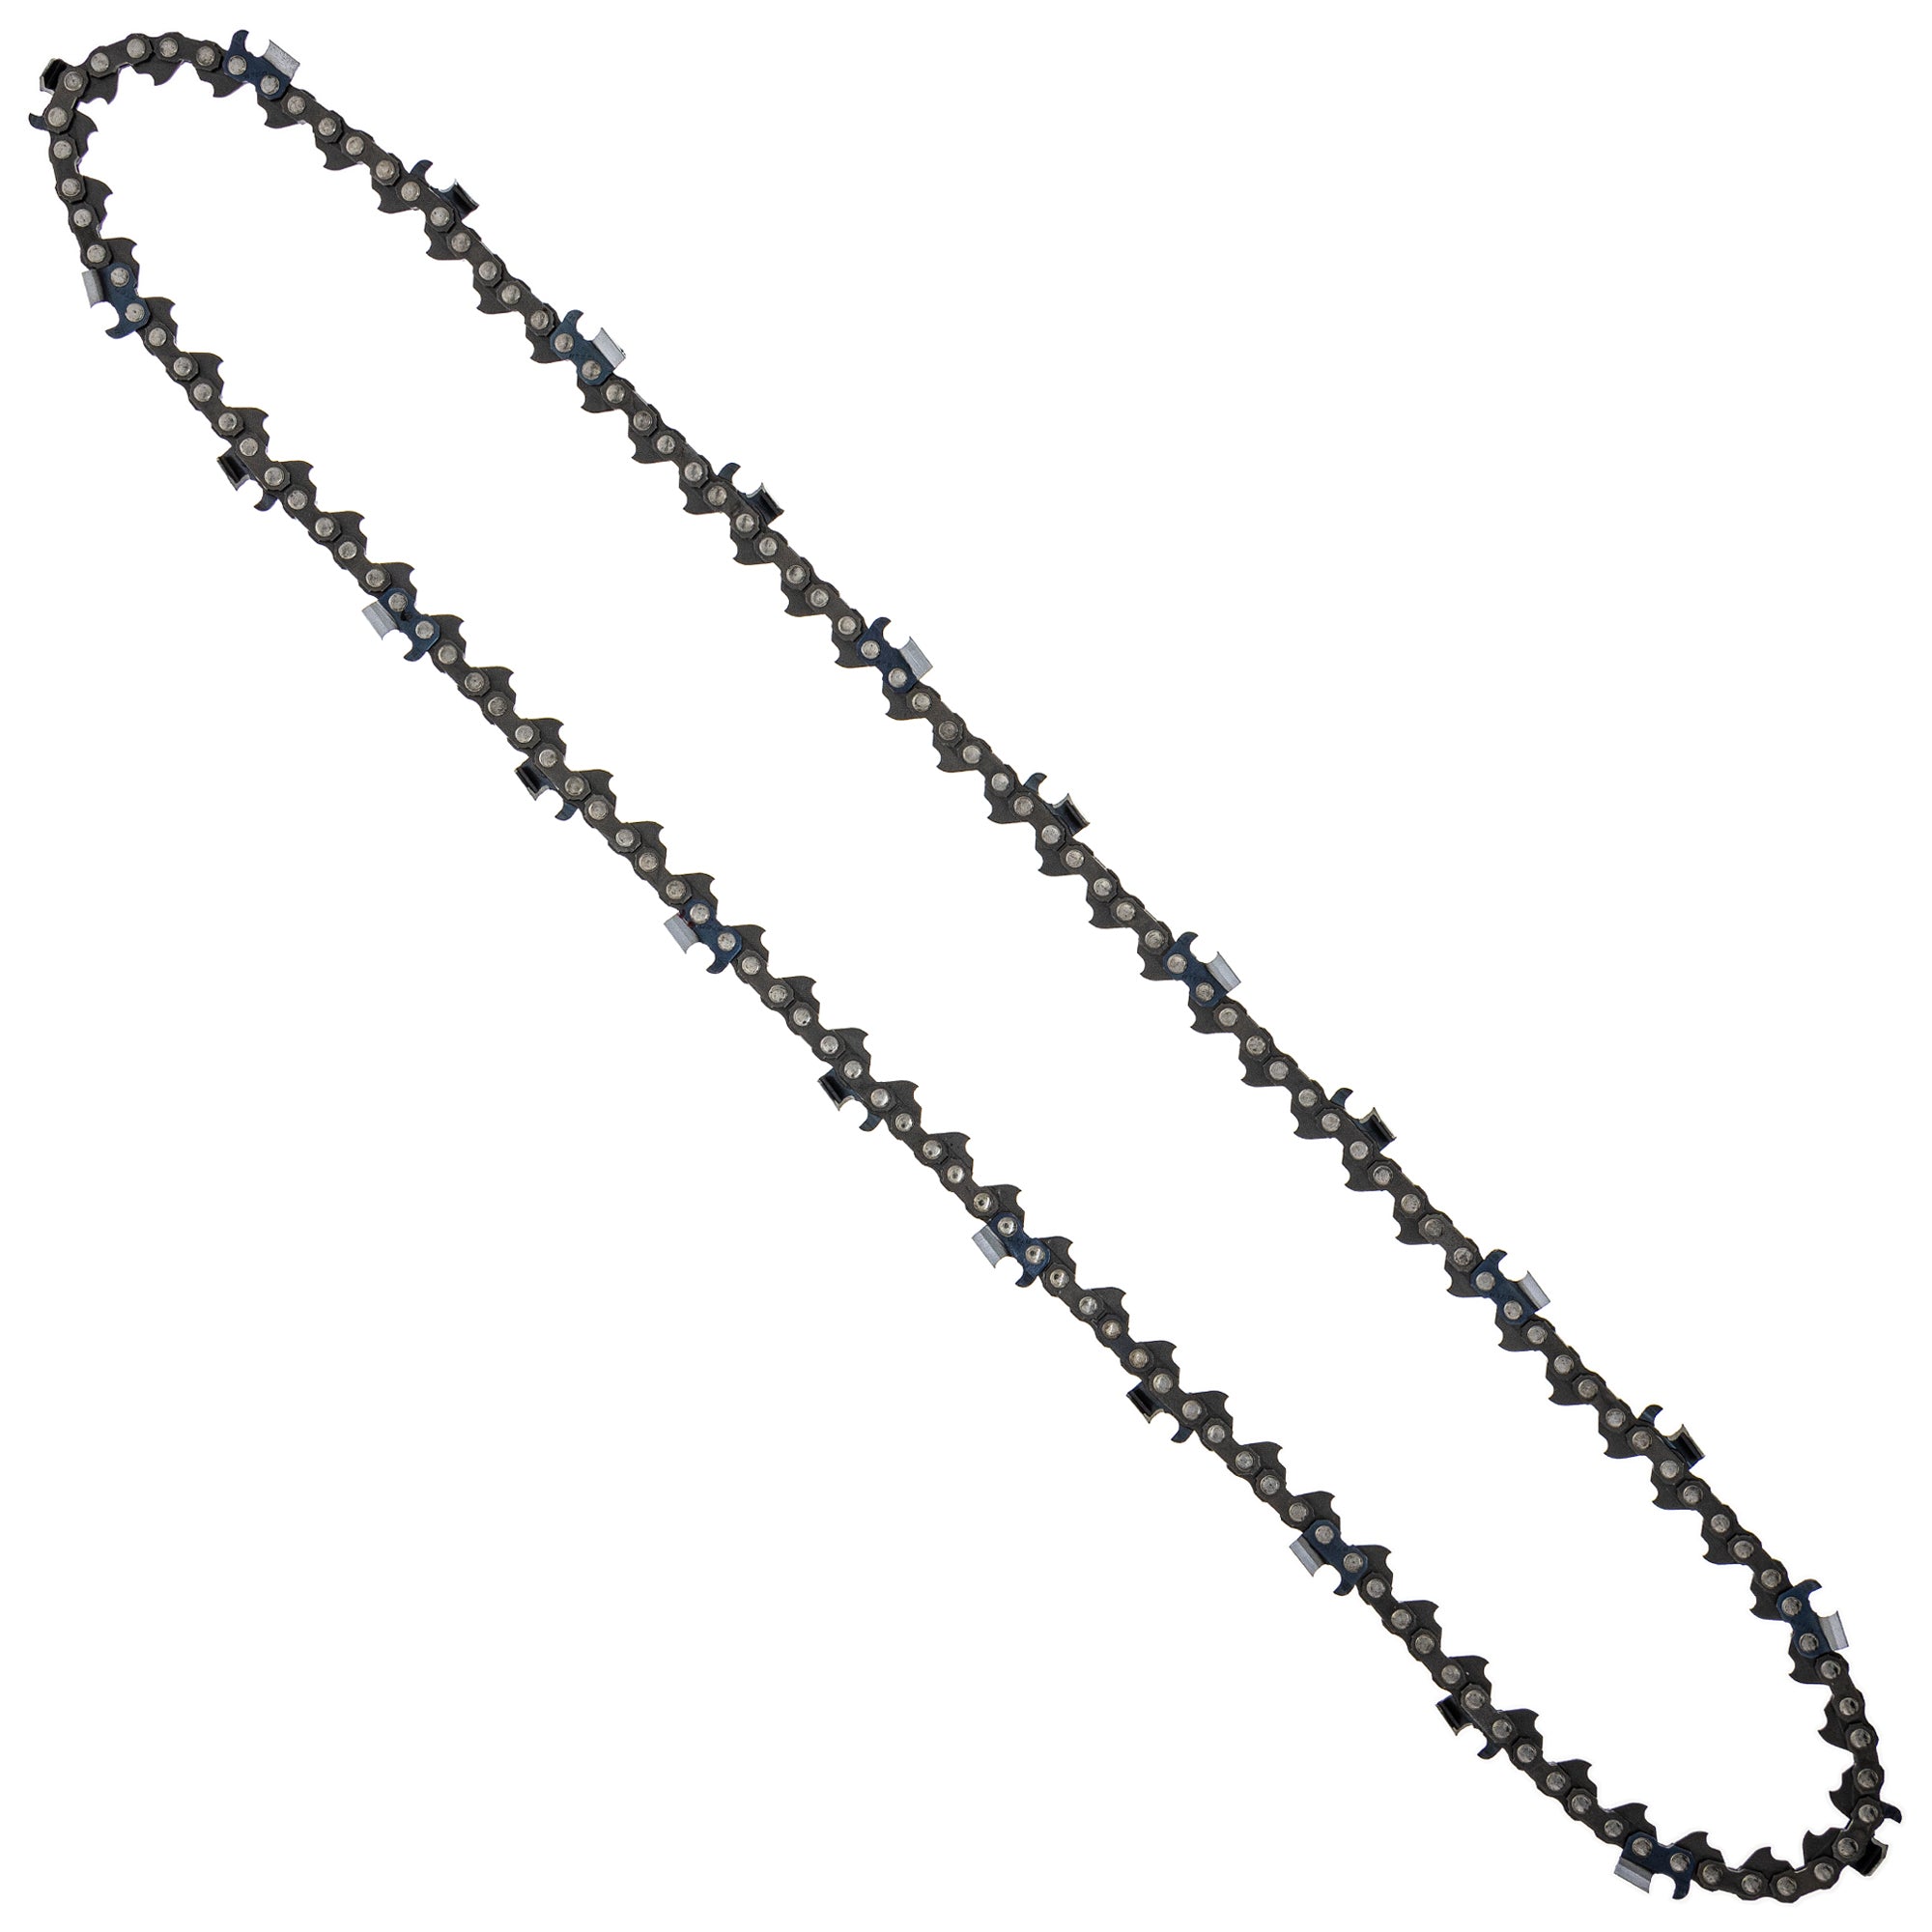 8TEN 810-CCC2258H Chain 3-Pack for zOTHER Ref No Oregon Husqvarna